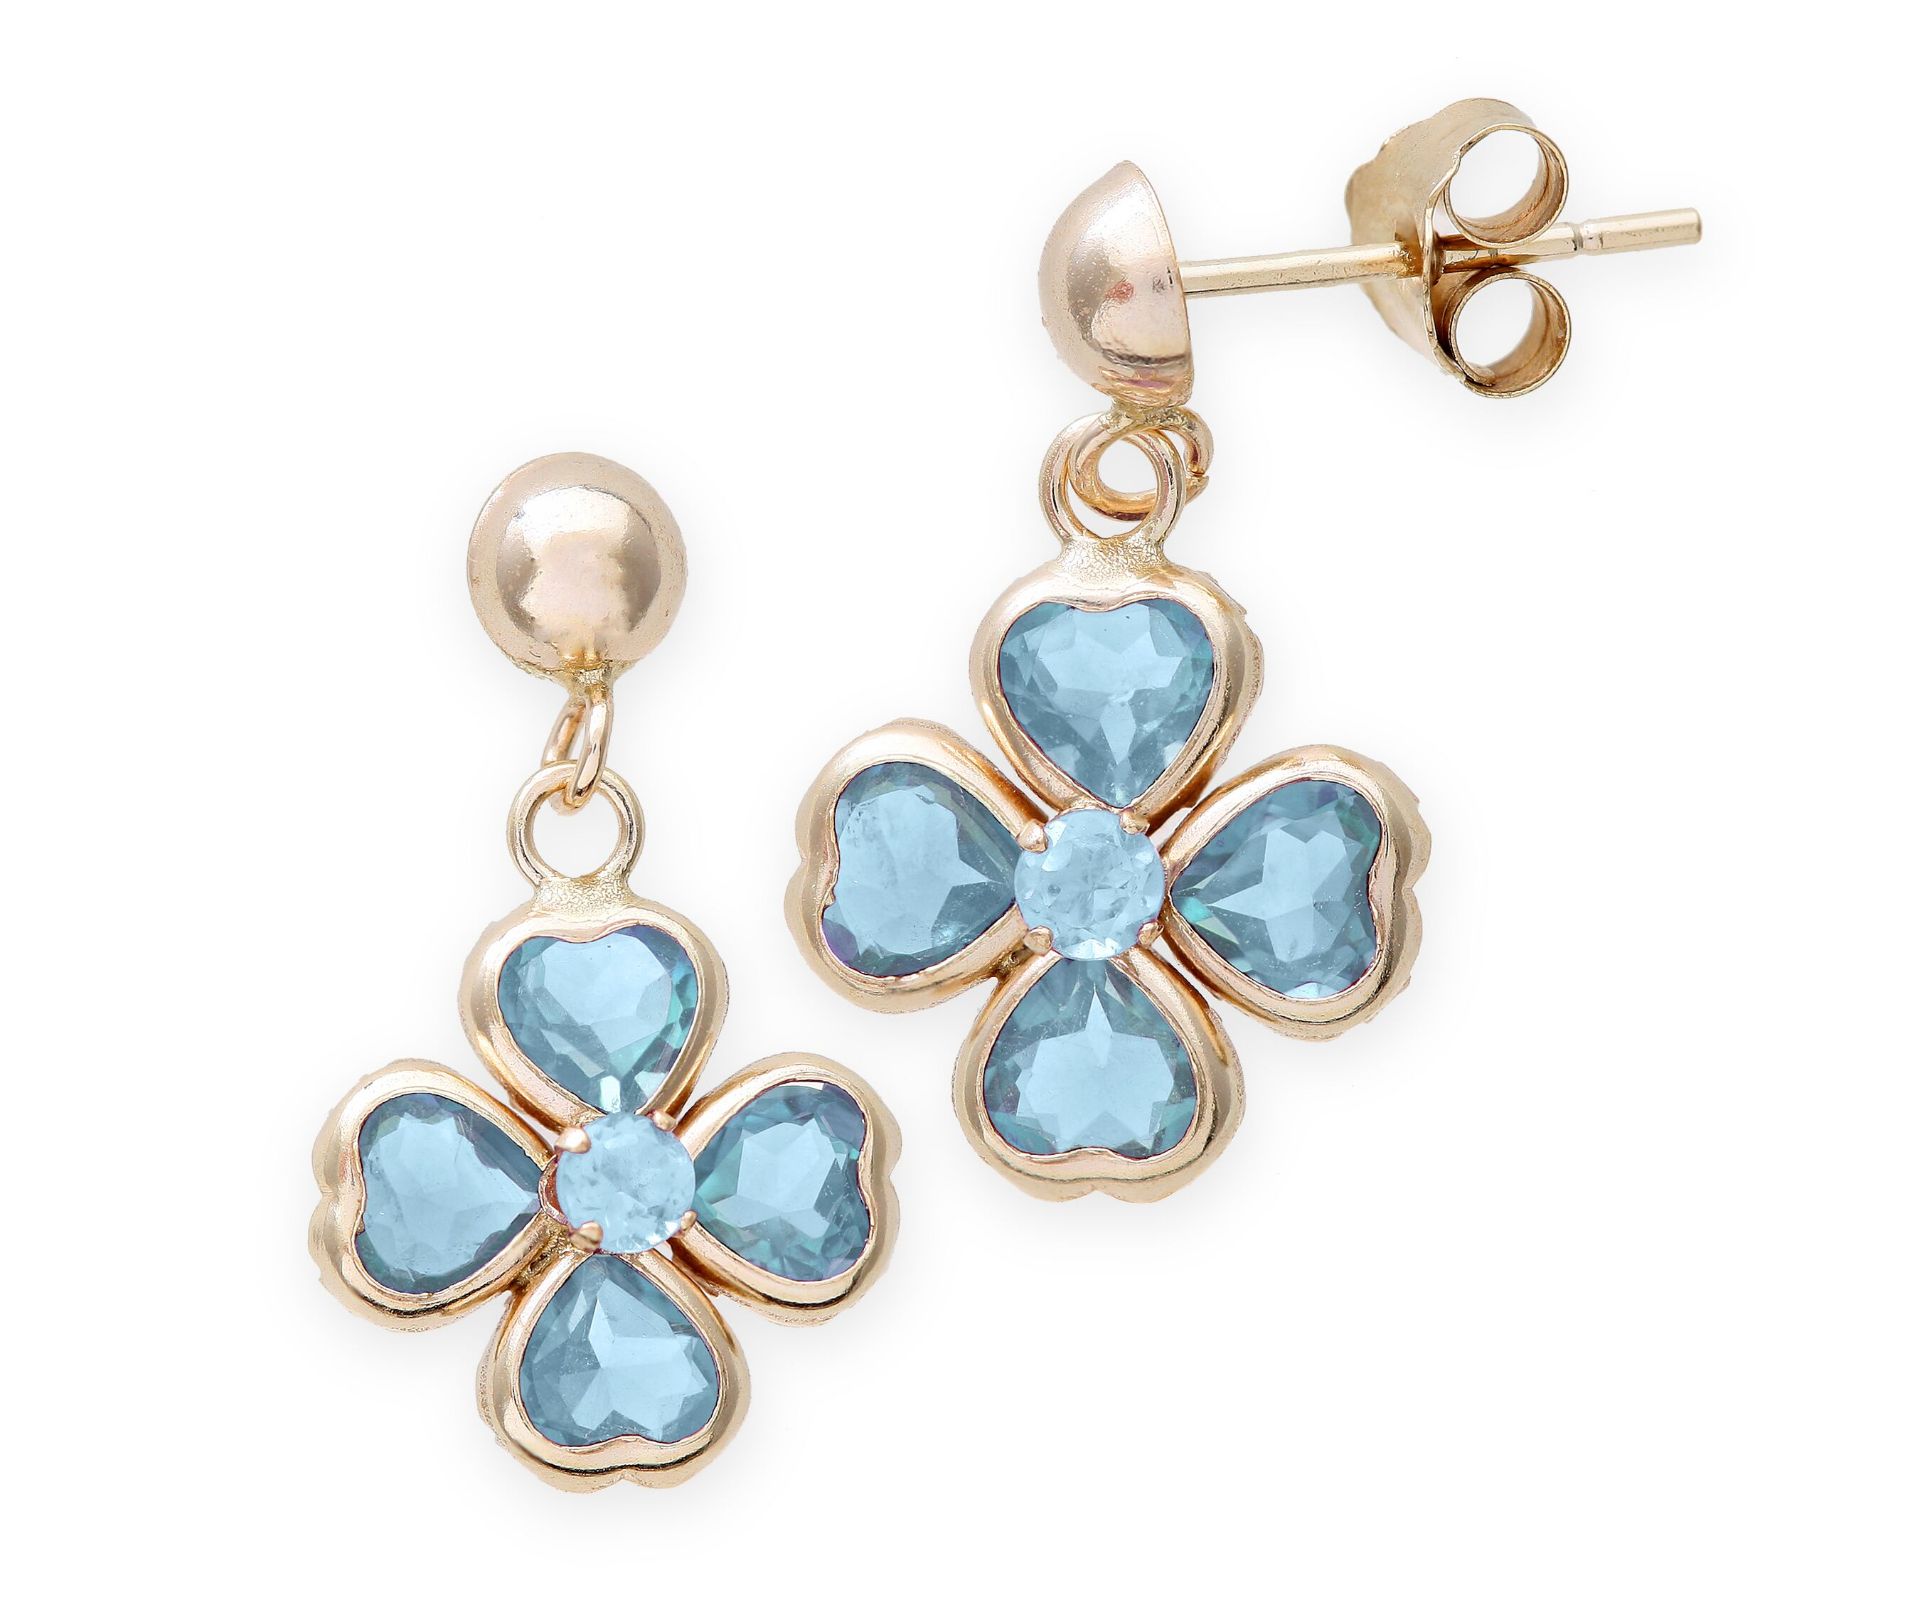 Blue Topaz Natural Gemstone Flower Shaped Earrings, Metal 9ct Yellow Gold, Weight (g) 1.1, RRP £